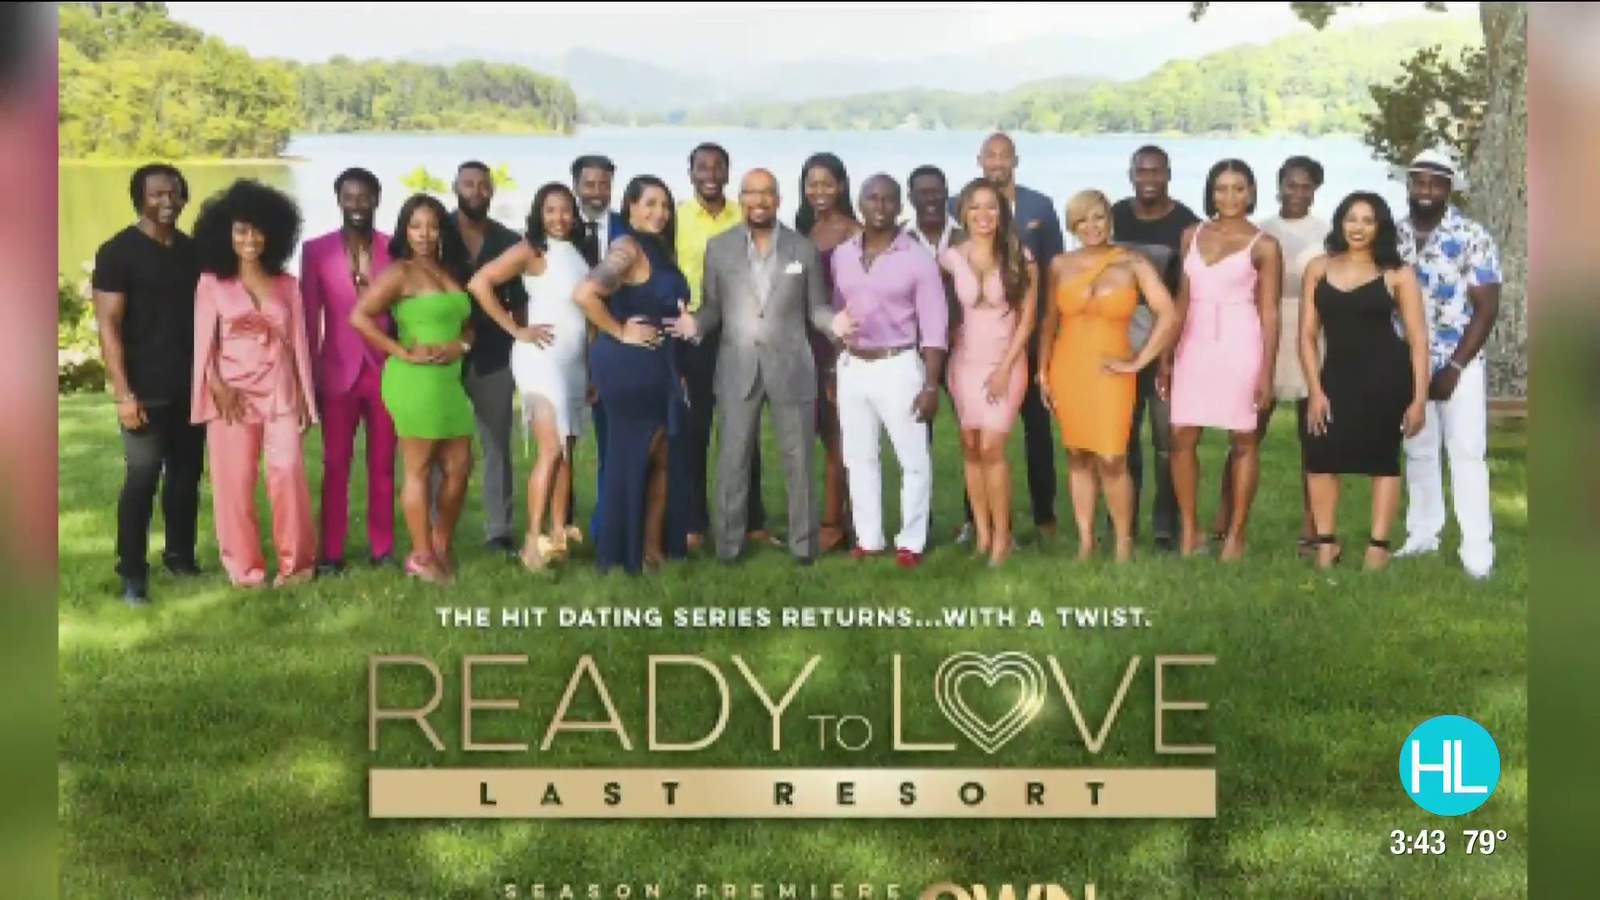 Houstonians are looking to find love on new season of hit dating show